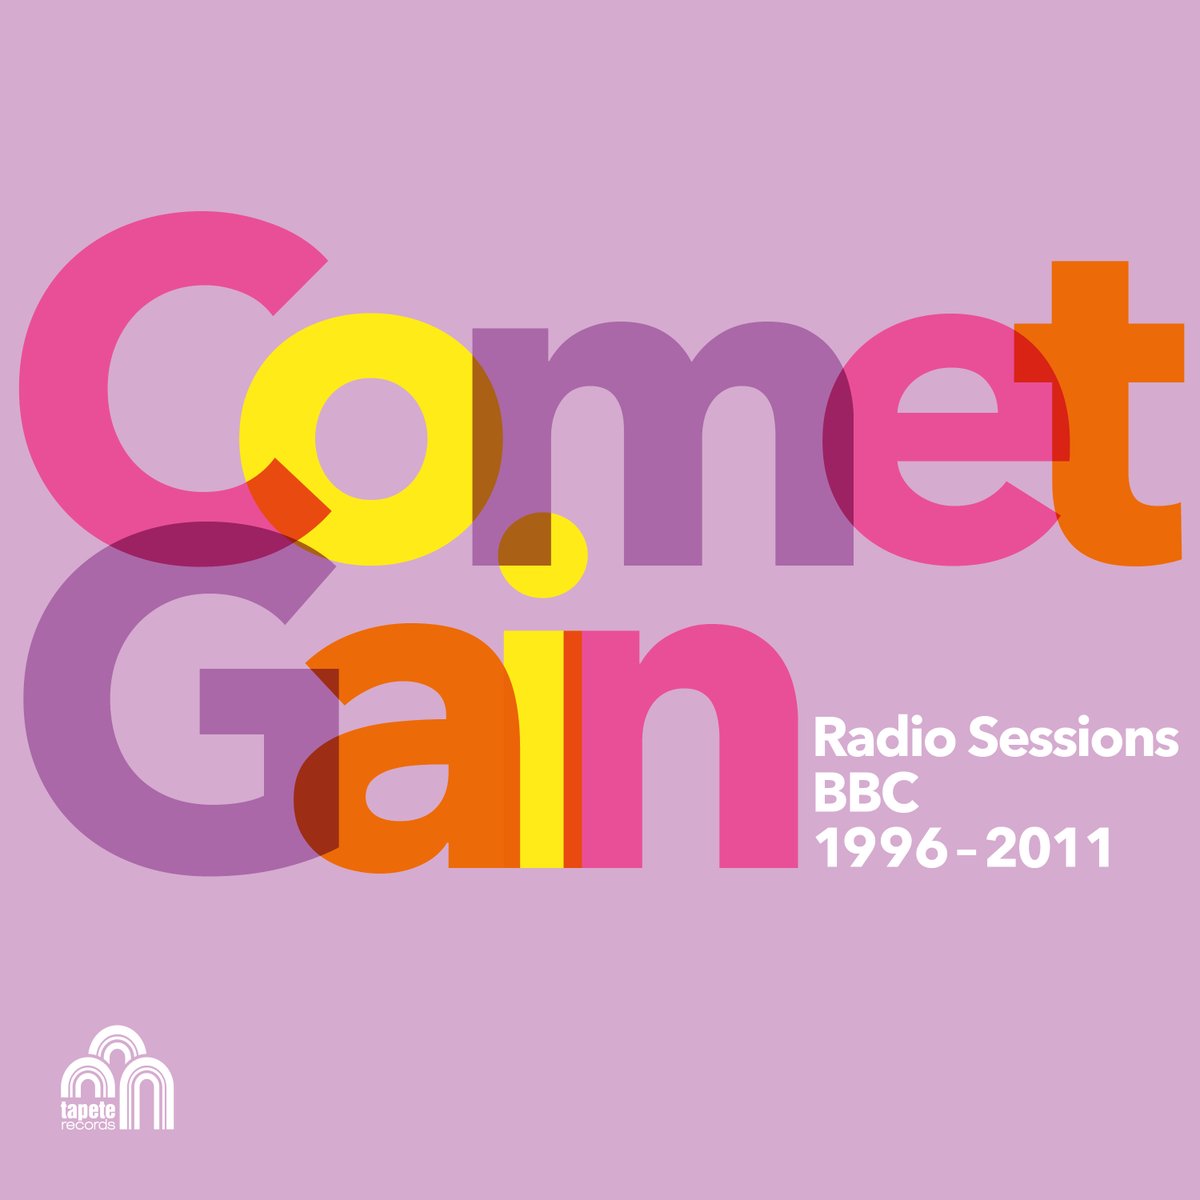 Comet Gain - Radio Sessions (BBC 1996-2011) out February 16! Pre order: orcd.co/cometgain